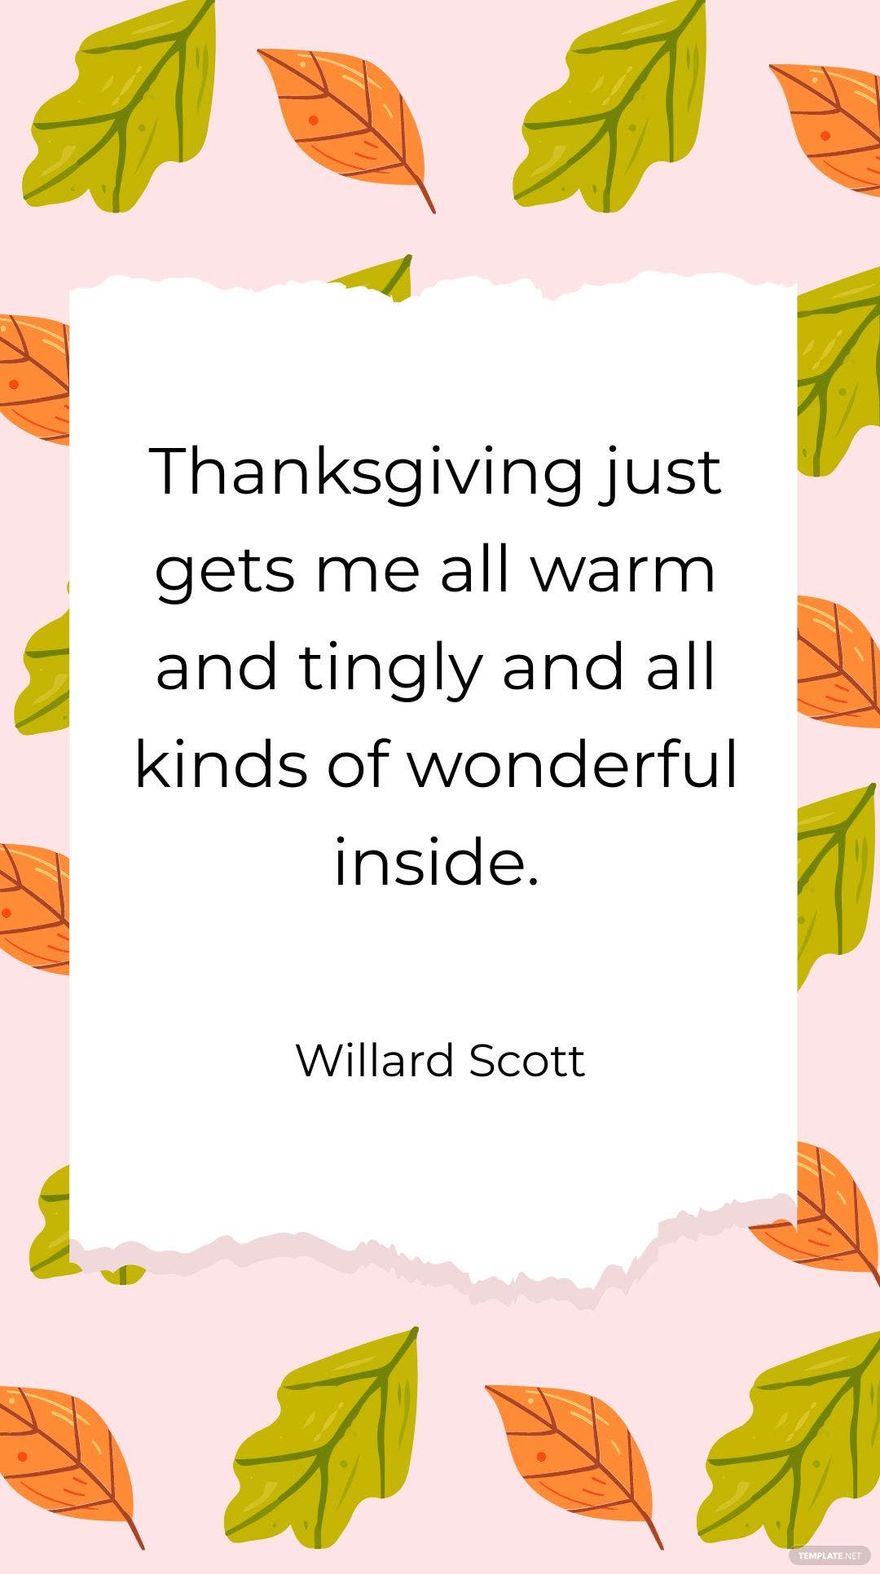 Free Willard Scott - Thanksgiving just gets me all warm and tingly and all kinds of wonderful inside. in JPG